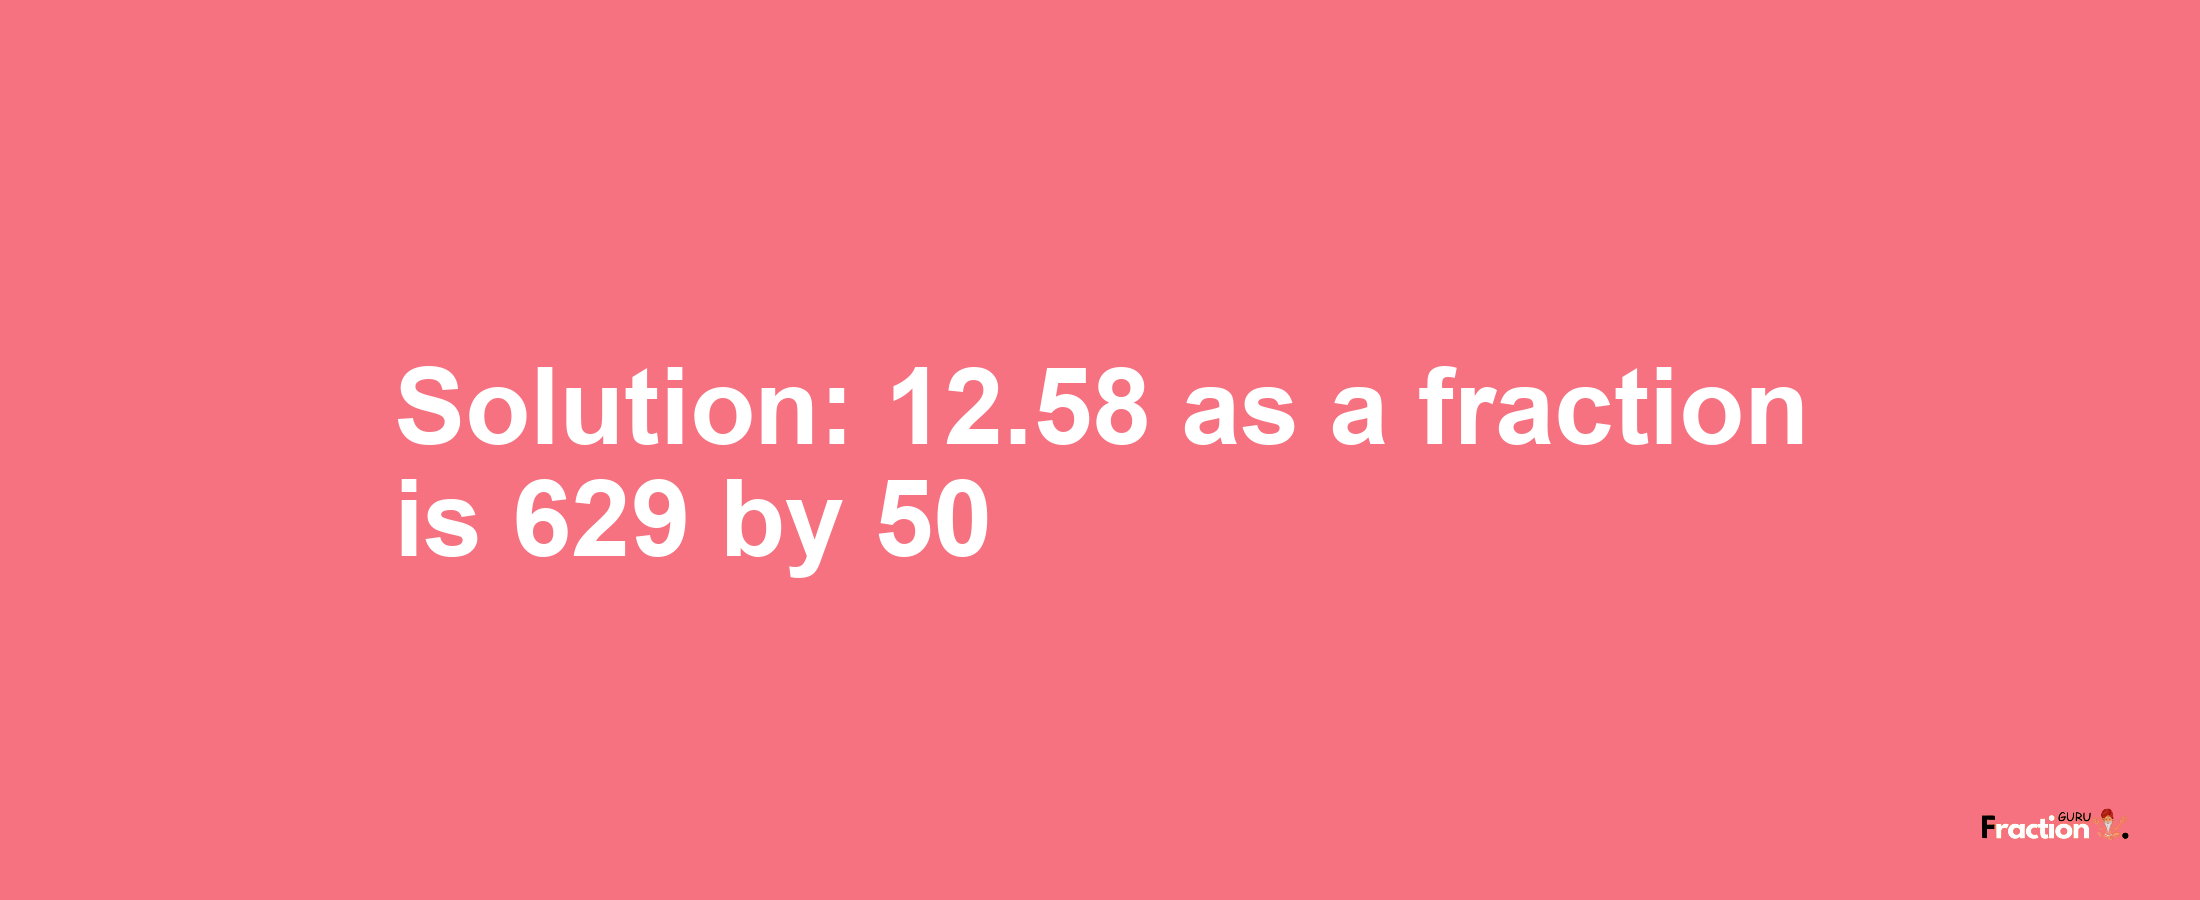 Solution:12.58 as a fraction is 629/50